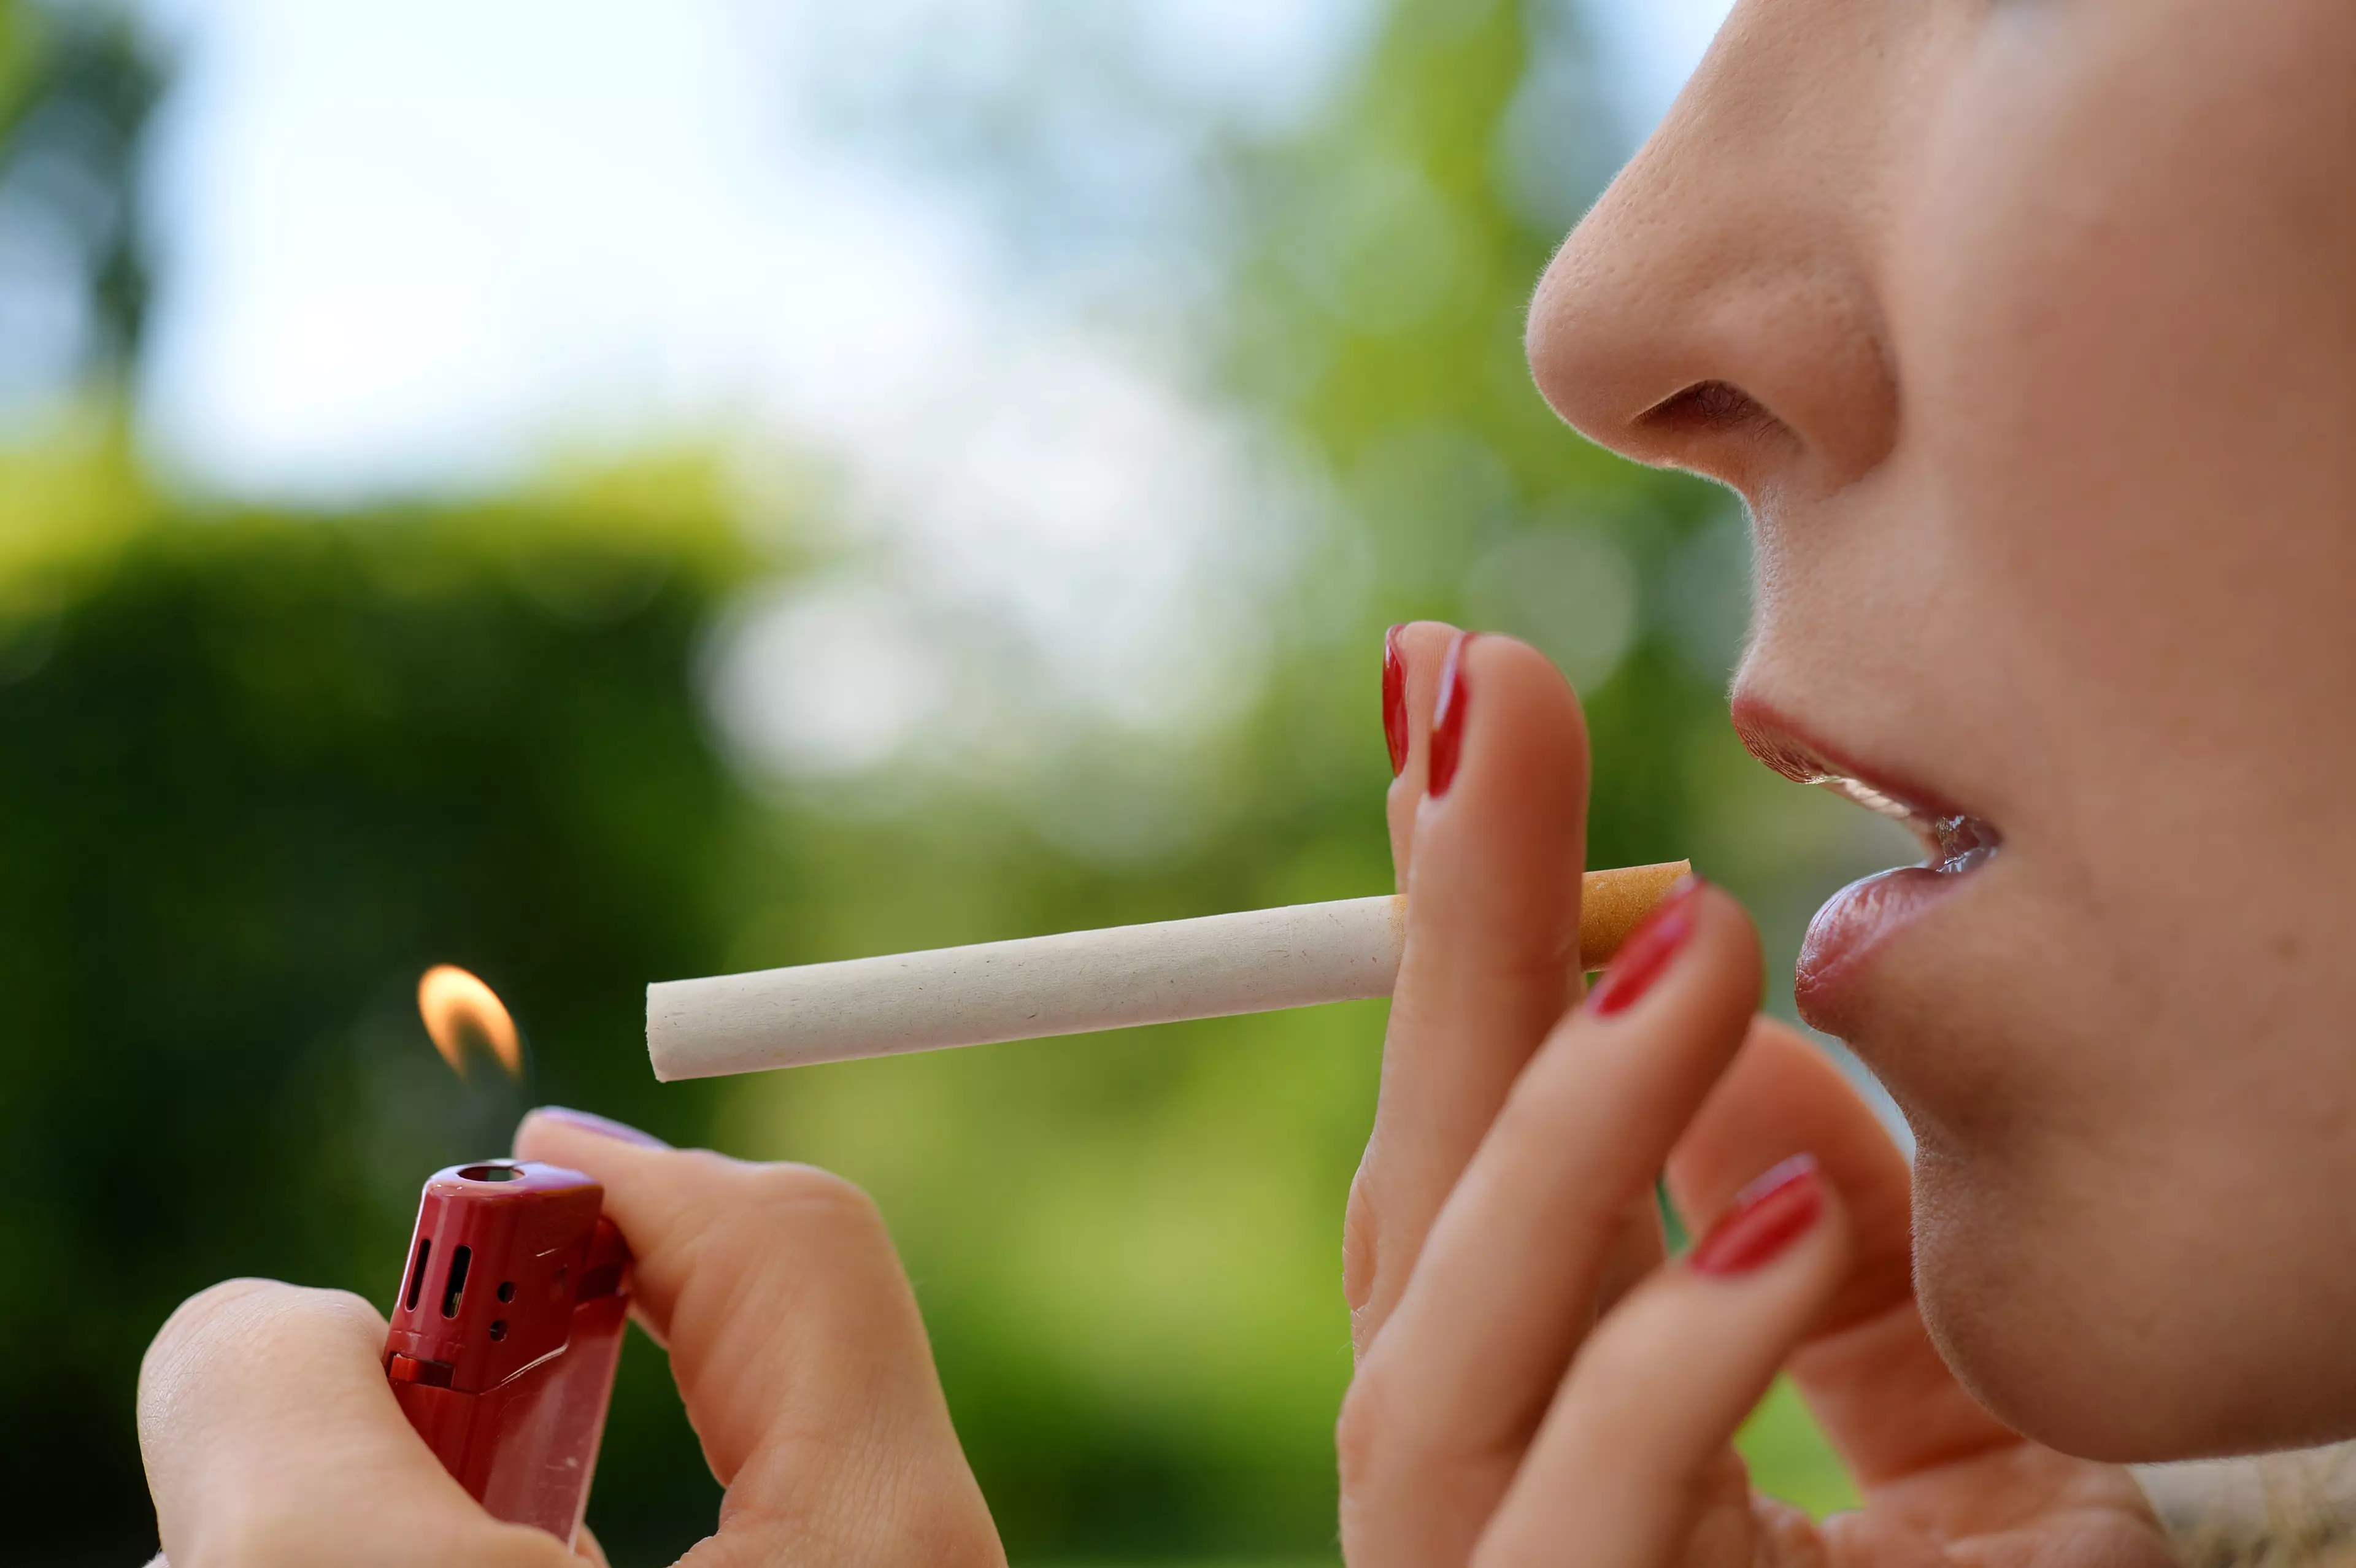 According to reports, smoking costs the UK economy £11bn a year.